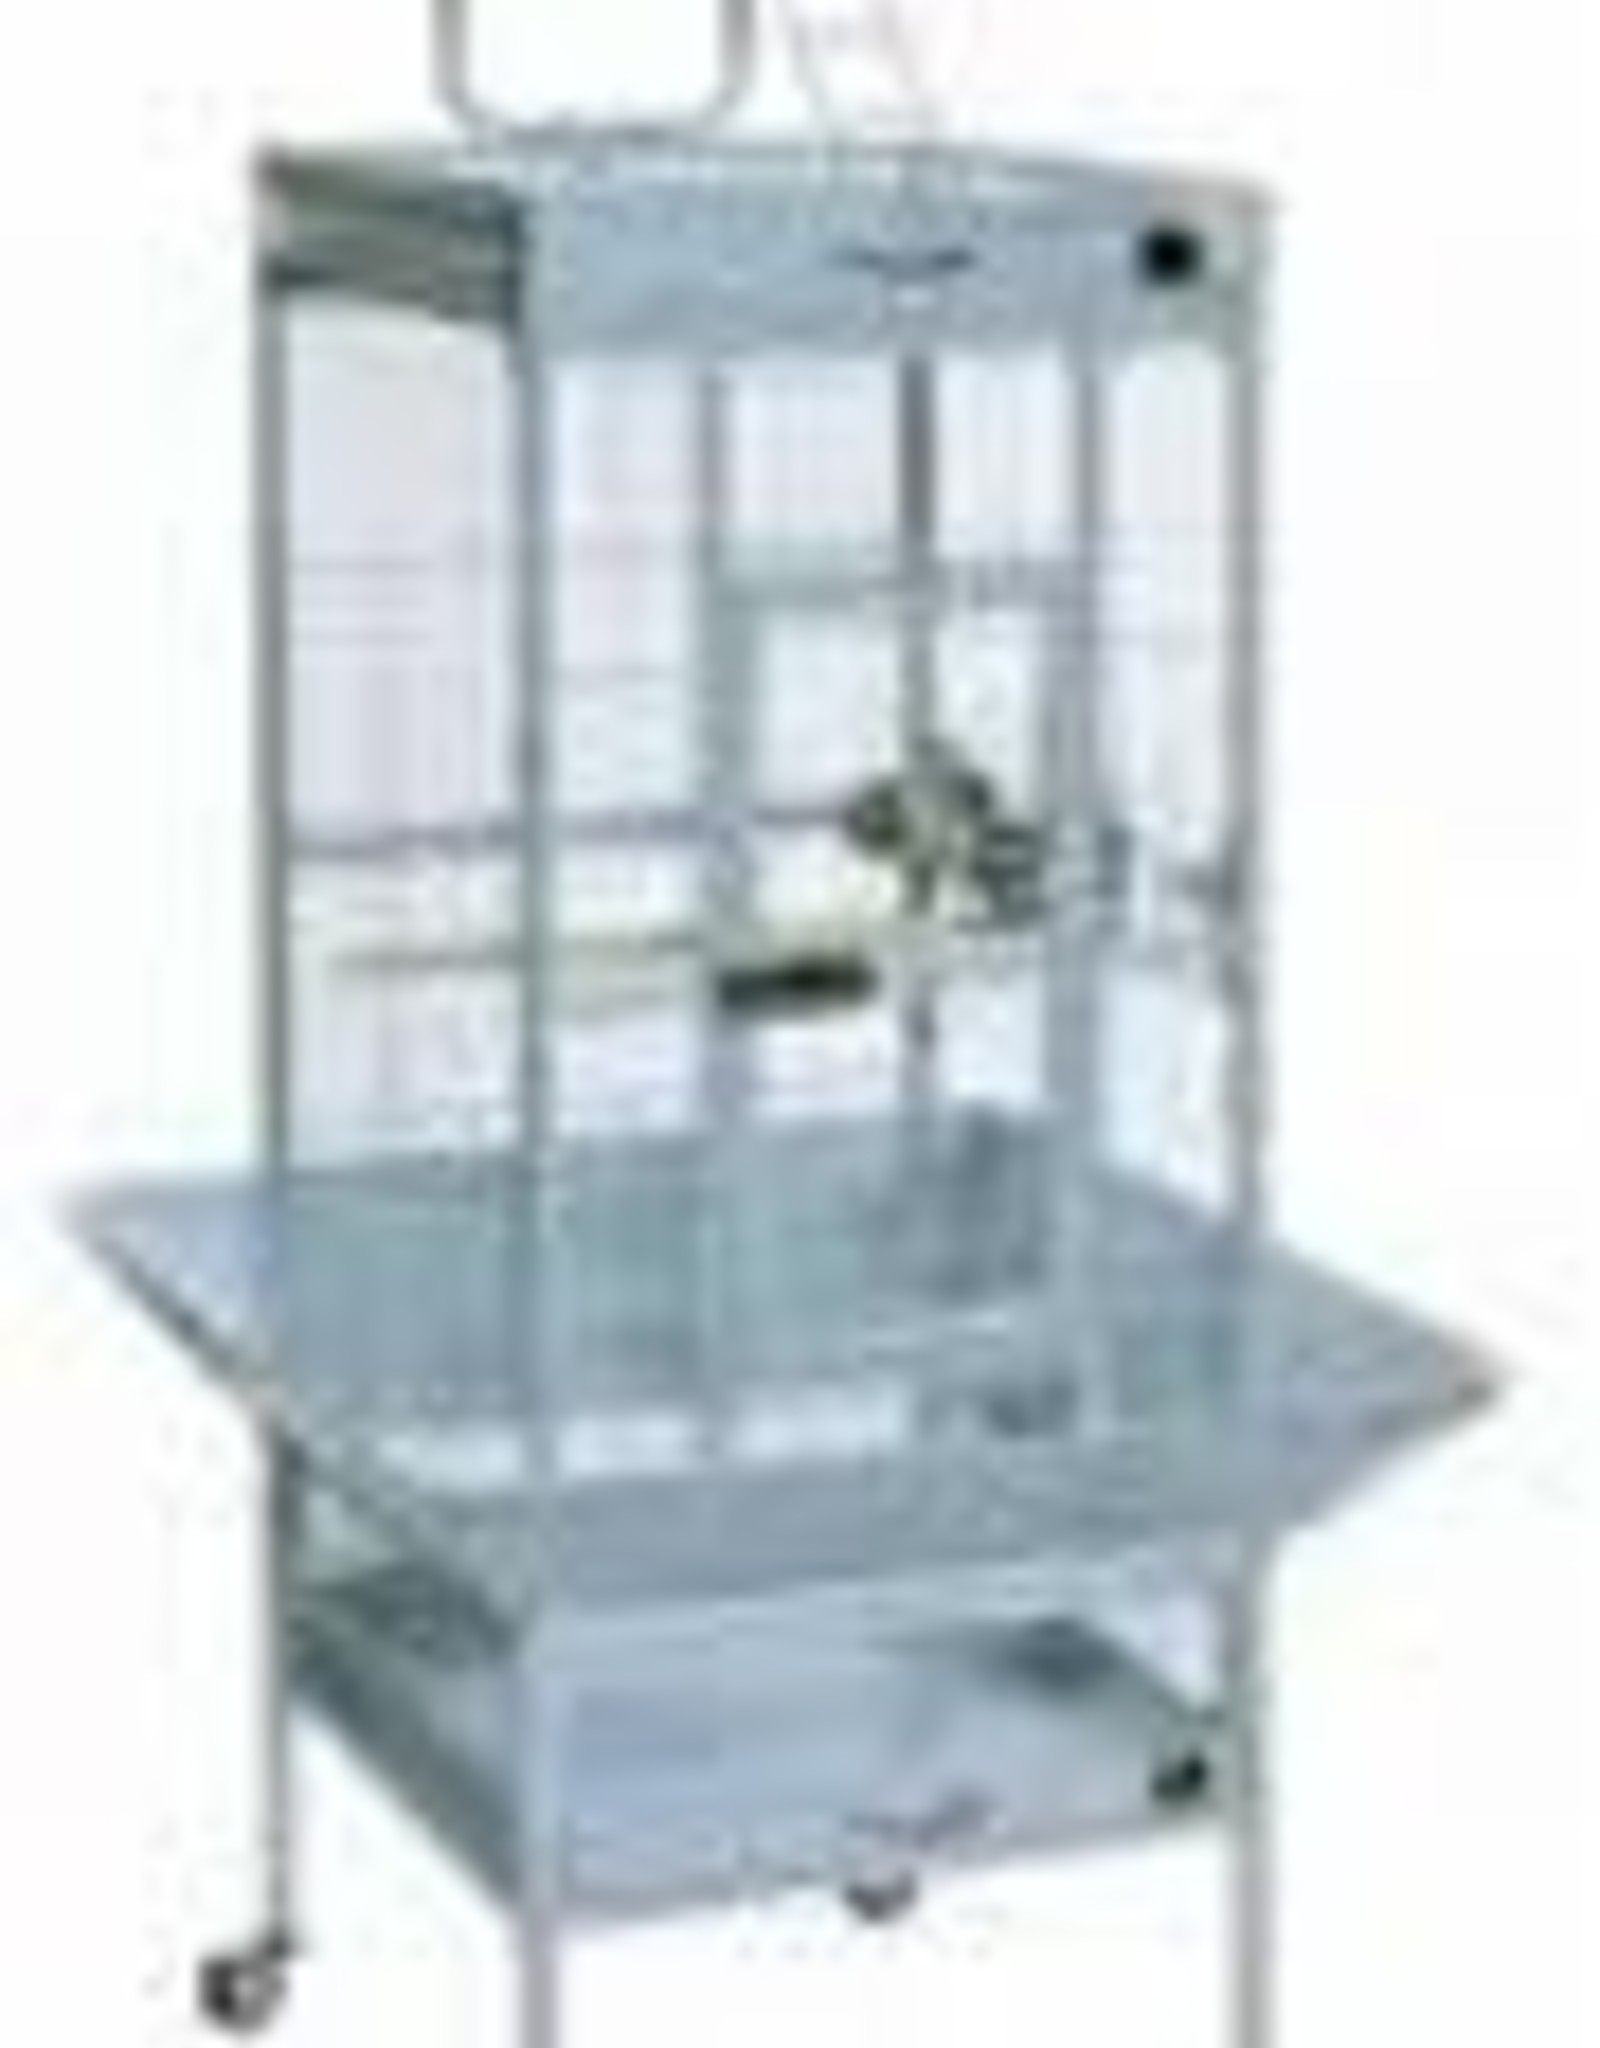 Prevue Hendryx 18x18x57 inch pewter kd cockatiel cage bird – Brothers  Country Supply